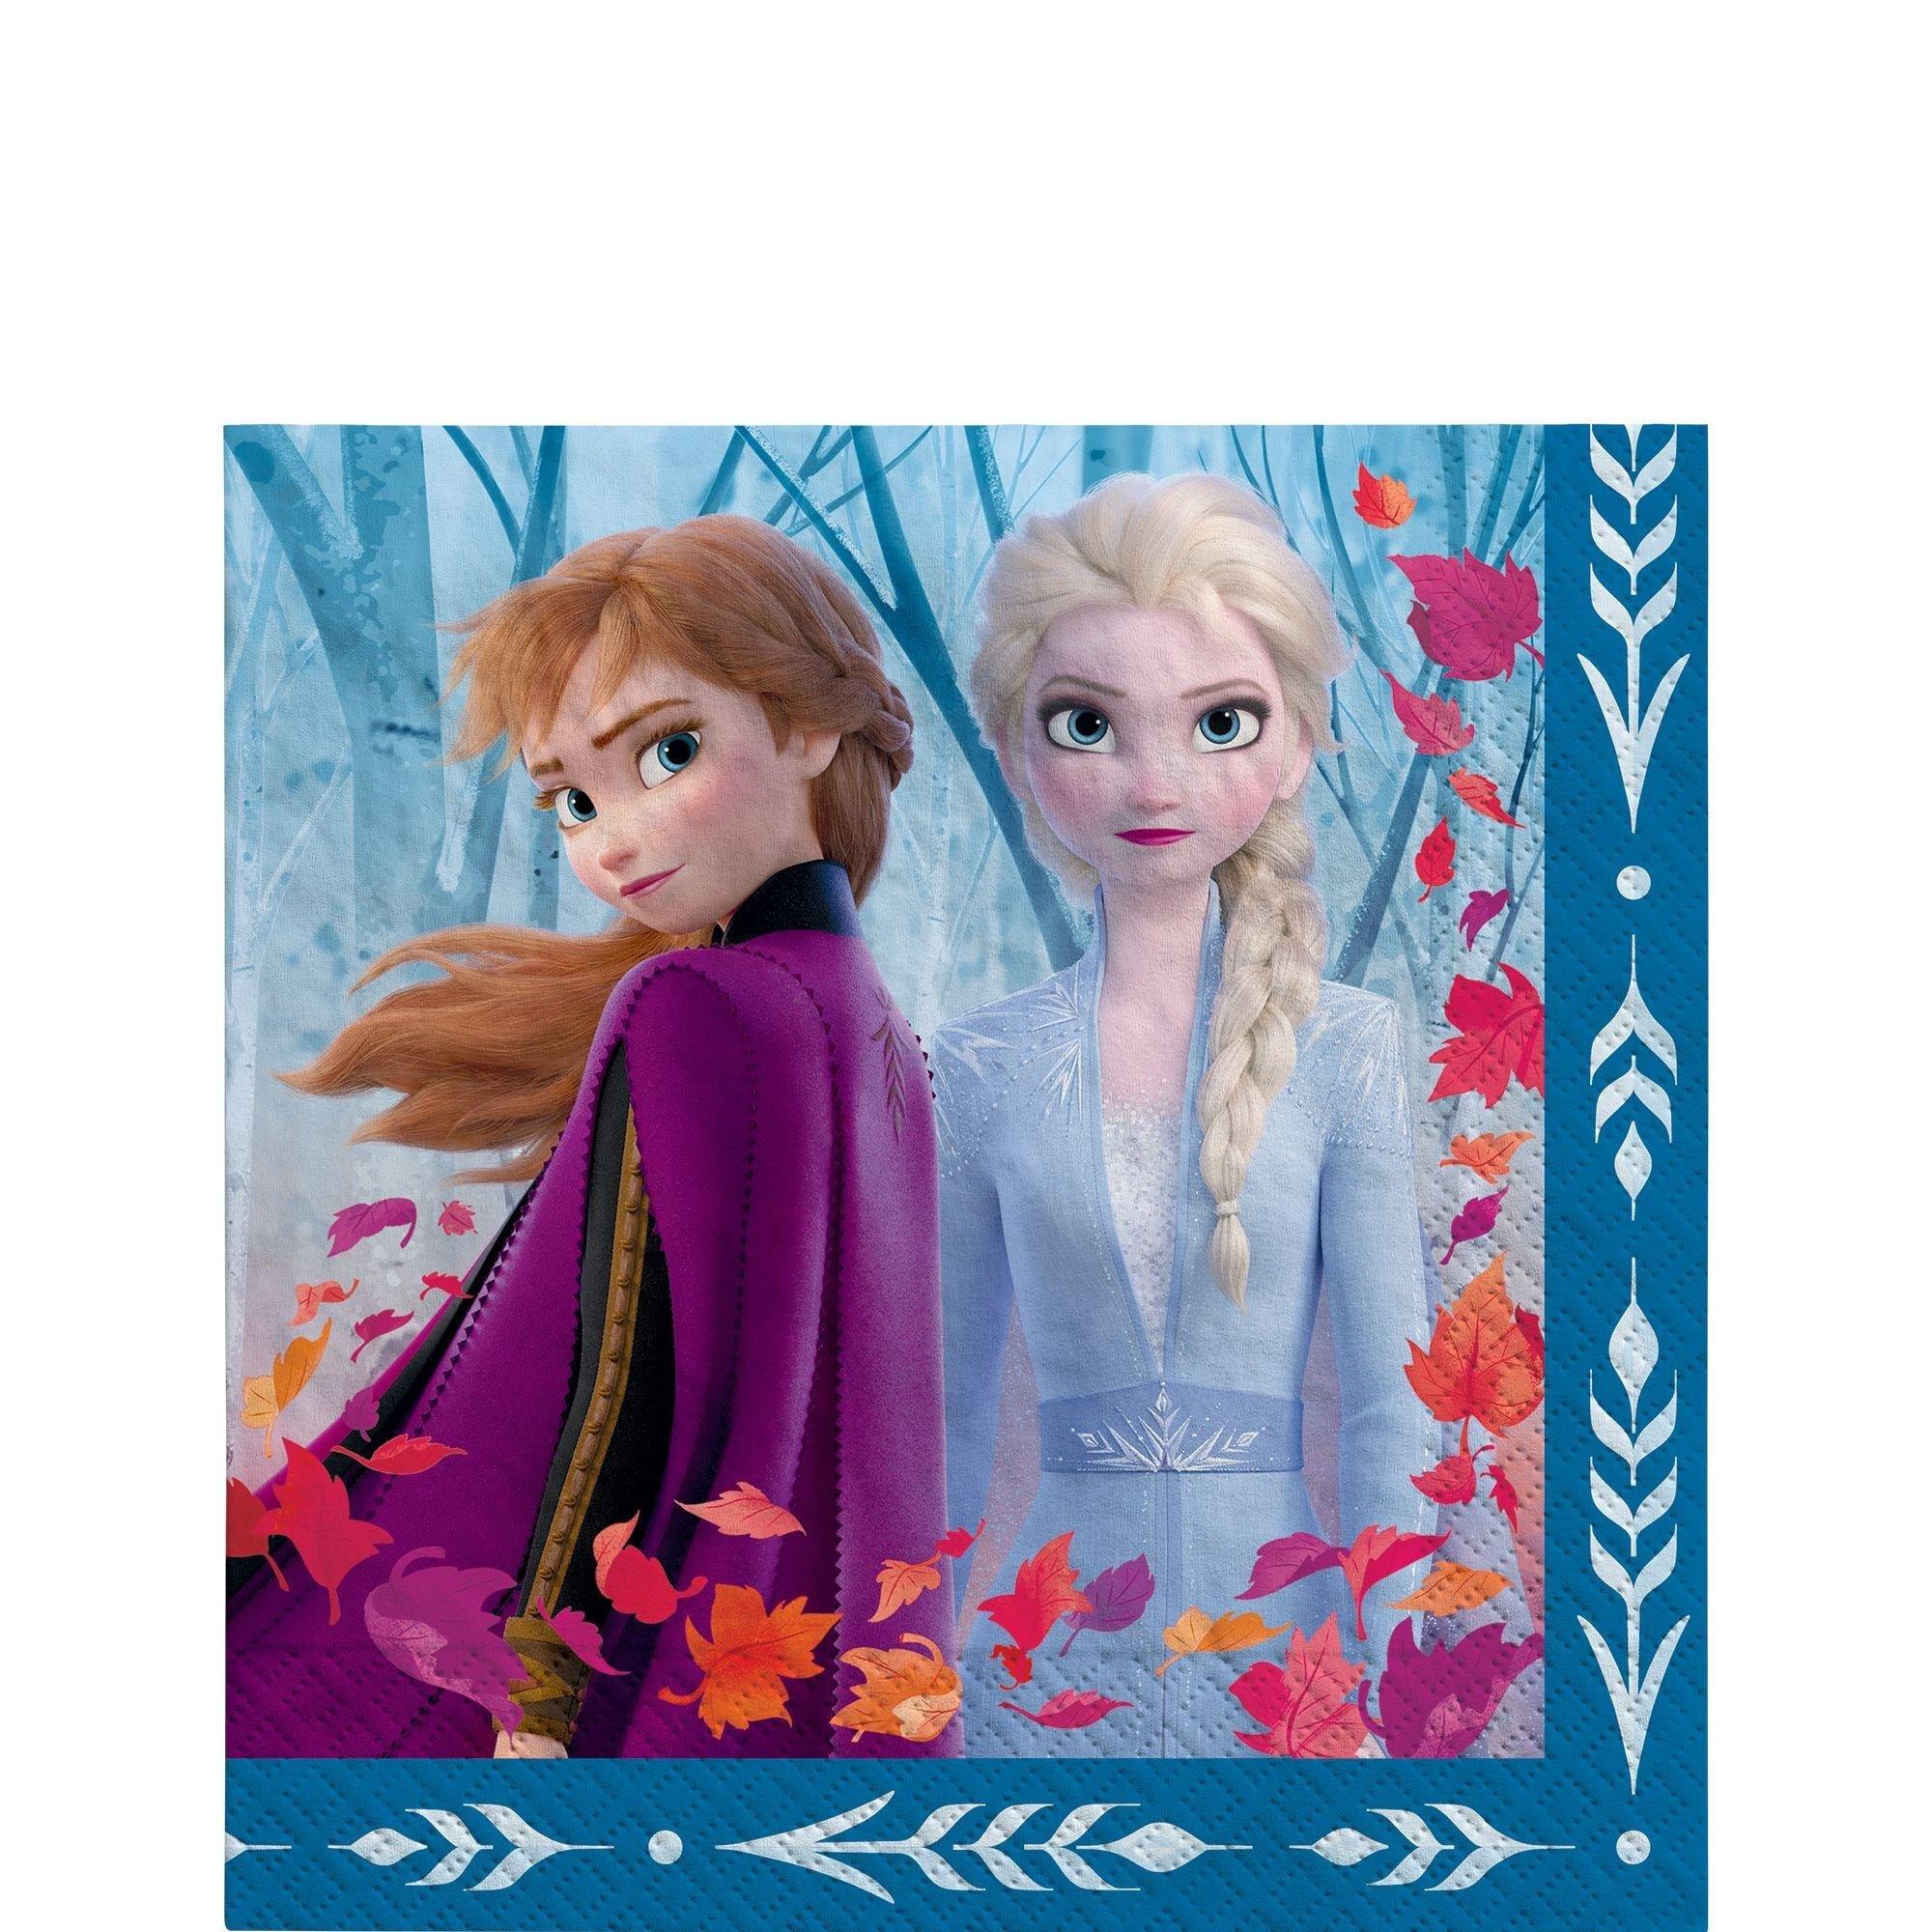 Frozen 2 Party Supplies Pack for 8 Guests - Kit Includes Plates, Napkins, Cups, Table Cover, Banner Decoration & Favor Cup